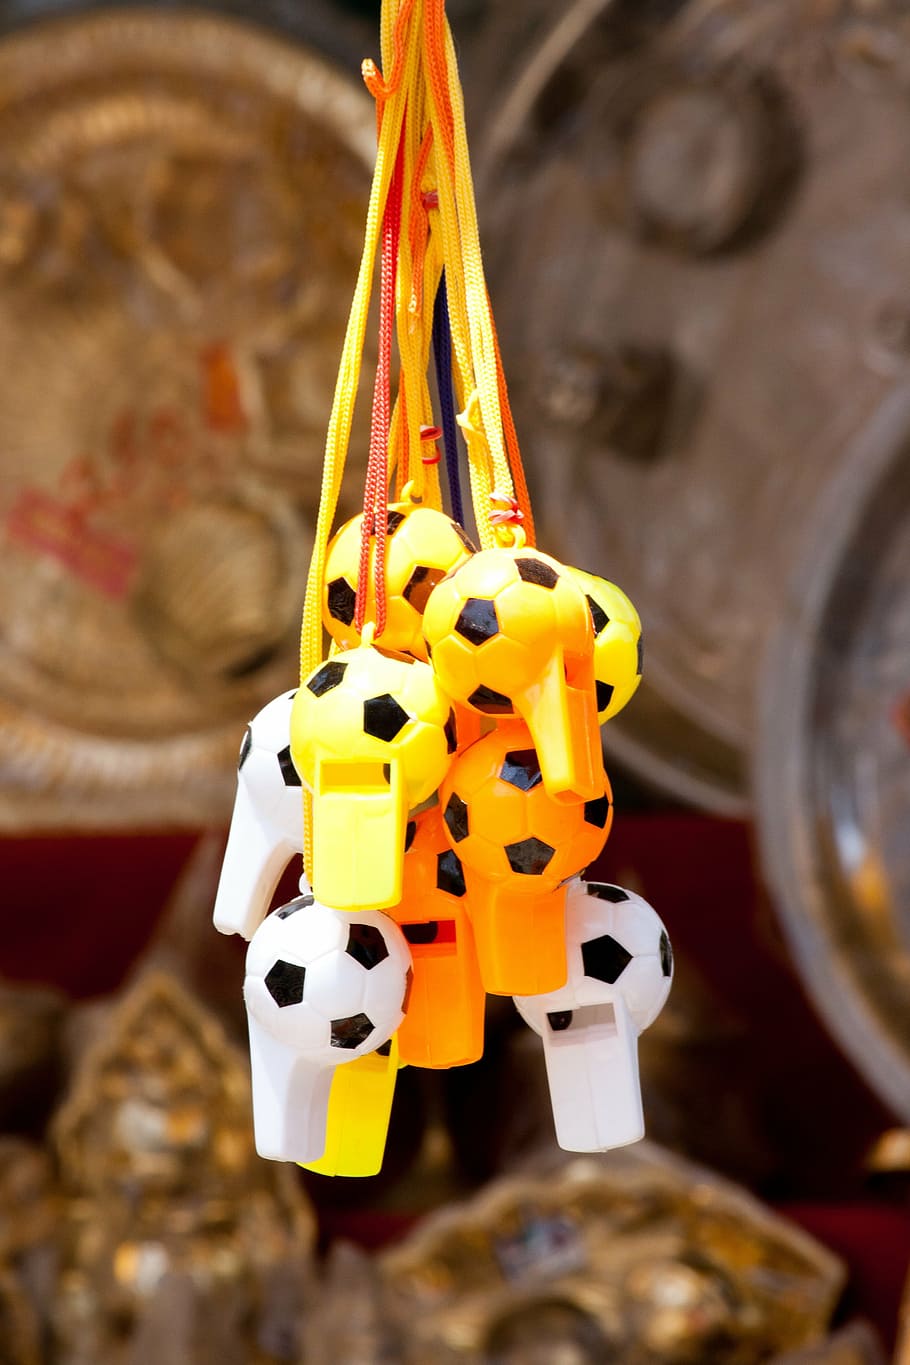 whistles, hanging, sound, yellow, toy, shop, focus on foreground, close-up, indoors, animal